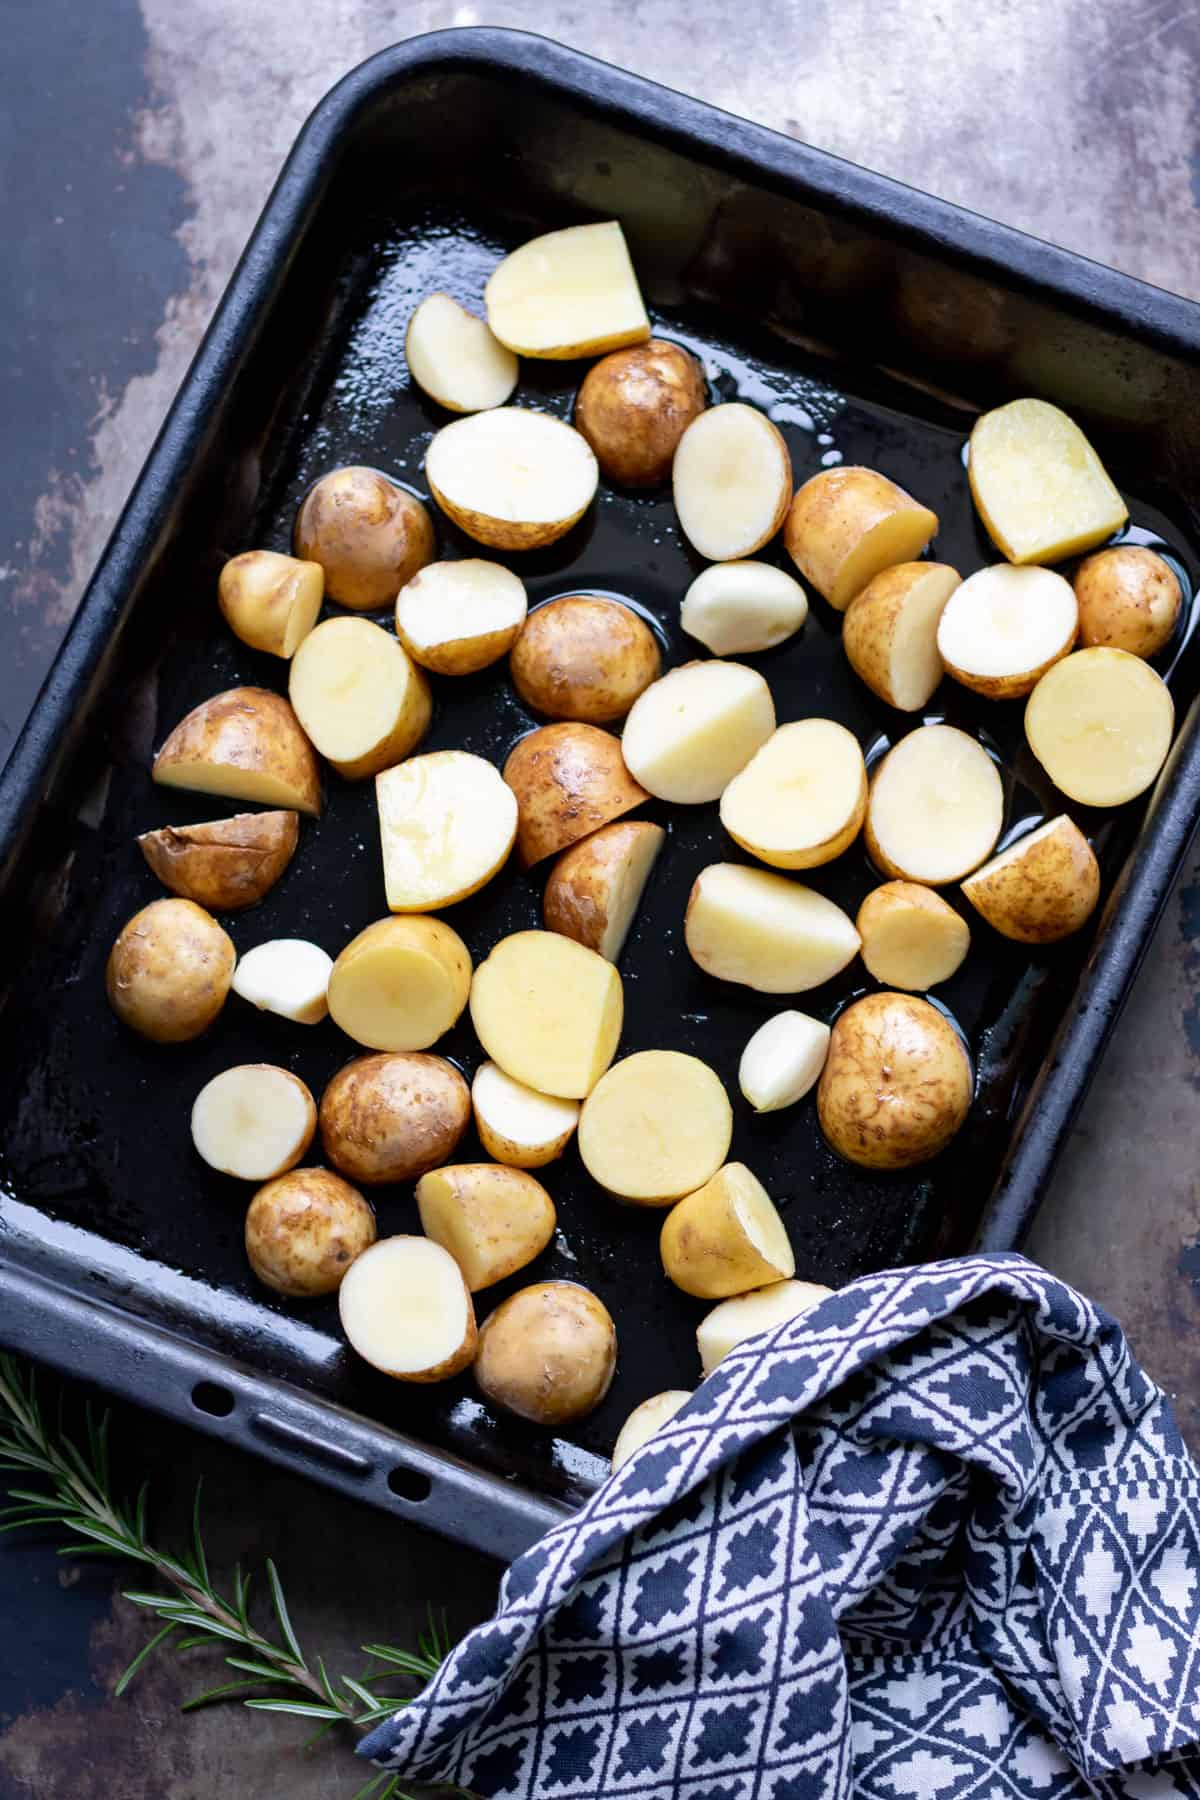 Baby potatoes on a pan ready to be cooked.